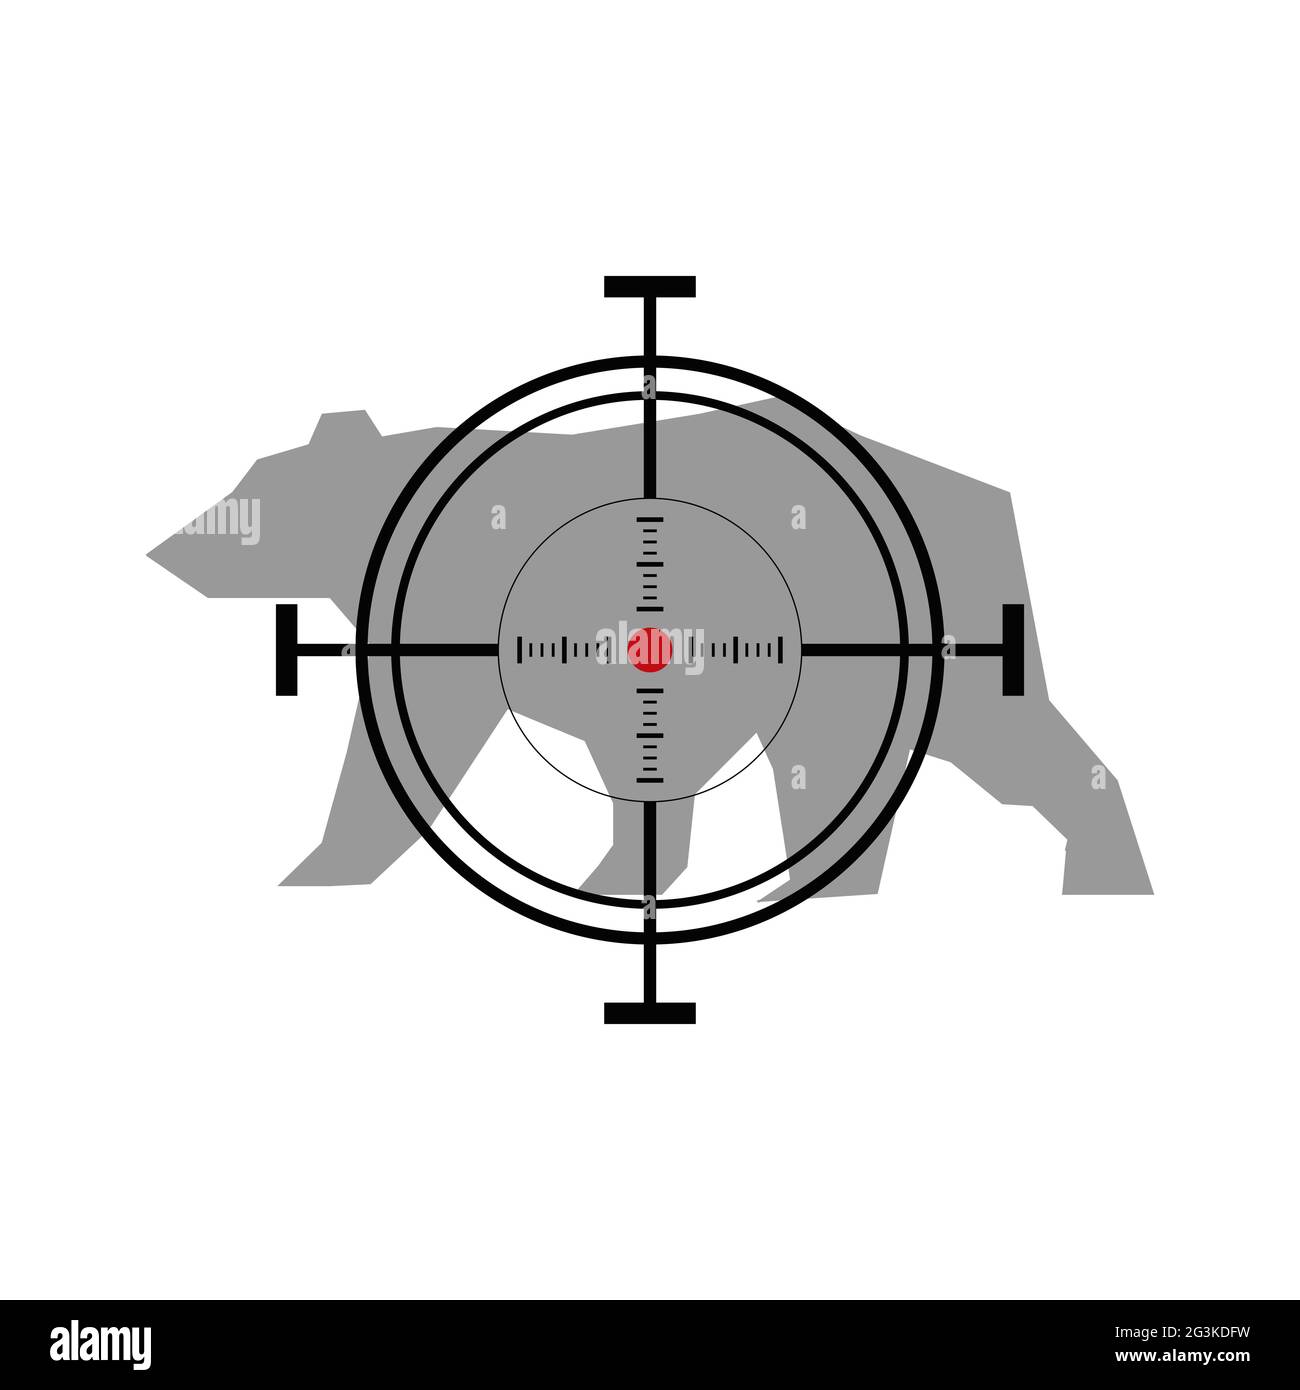 Illustration with bear hunting. Crosshair target Stock Photo